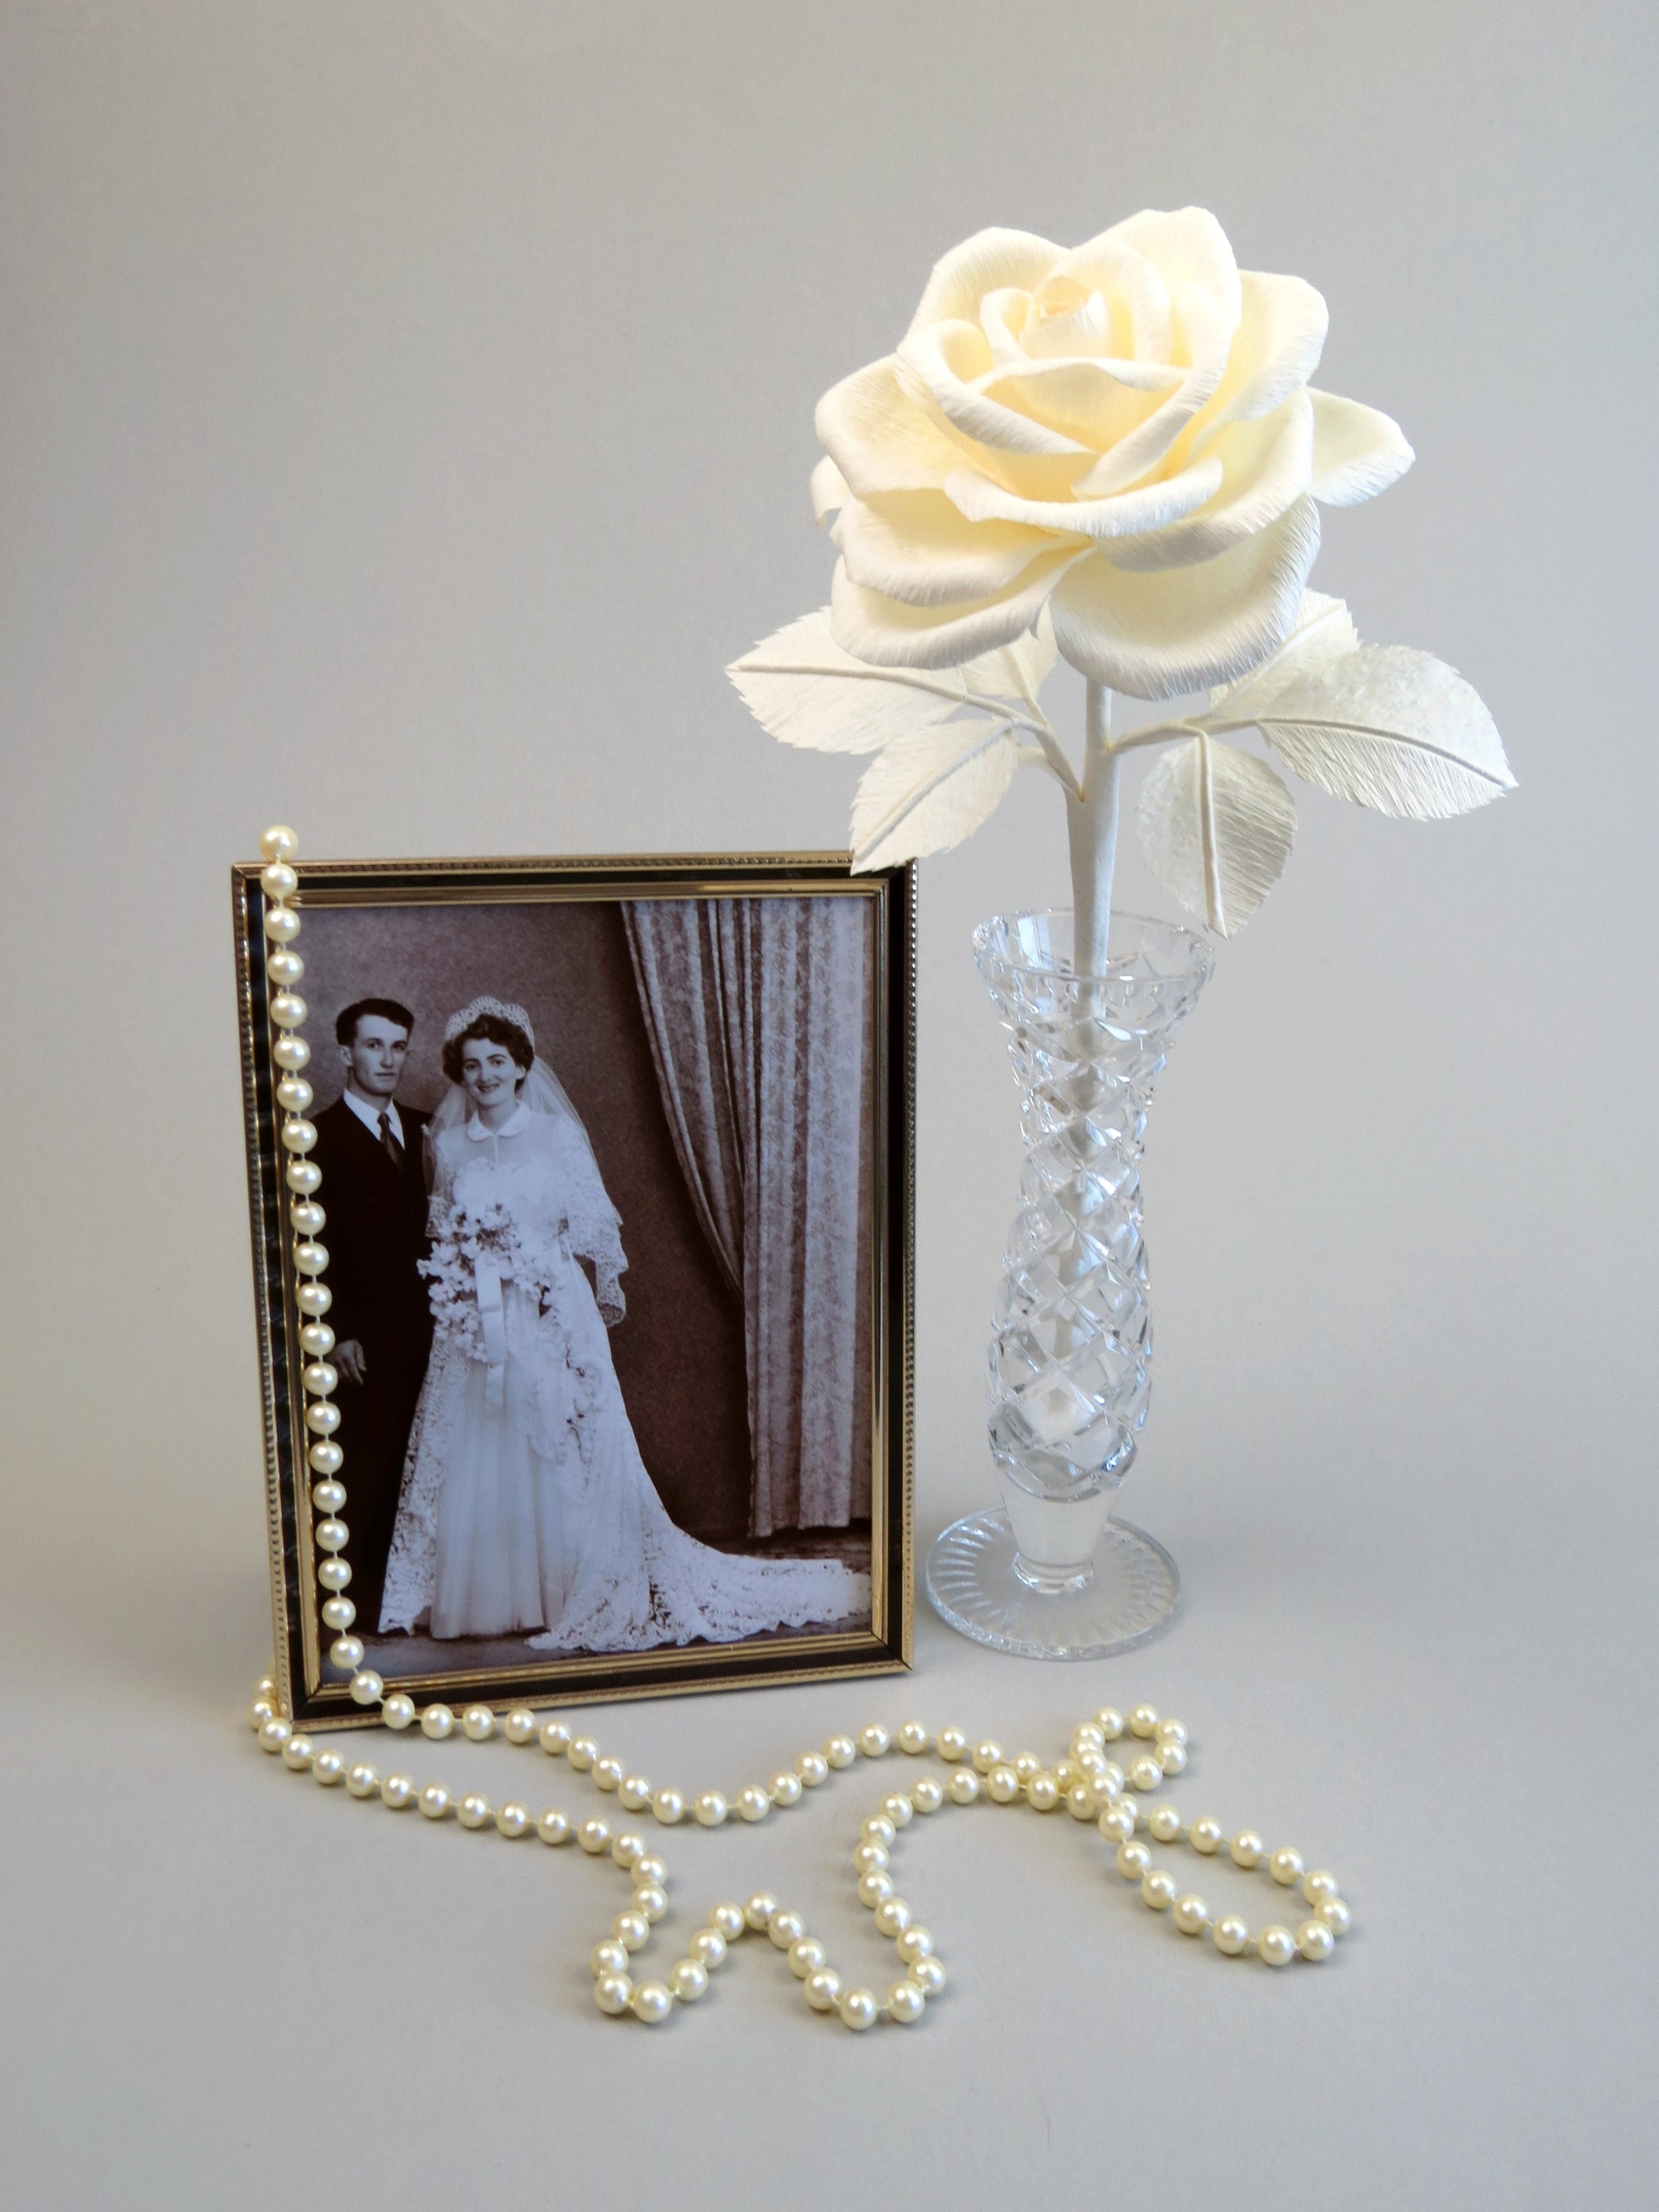 Ivory crepe paper rose with six ivory leaves standing in a slender glass vase with a thin gold framed sepia wedding photo of a happy vintage bride and groom standing beside it with a necklace of pearls draped over the frame